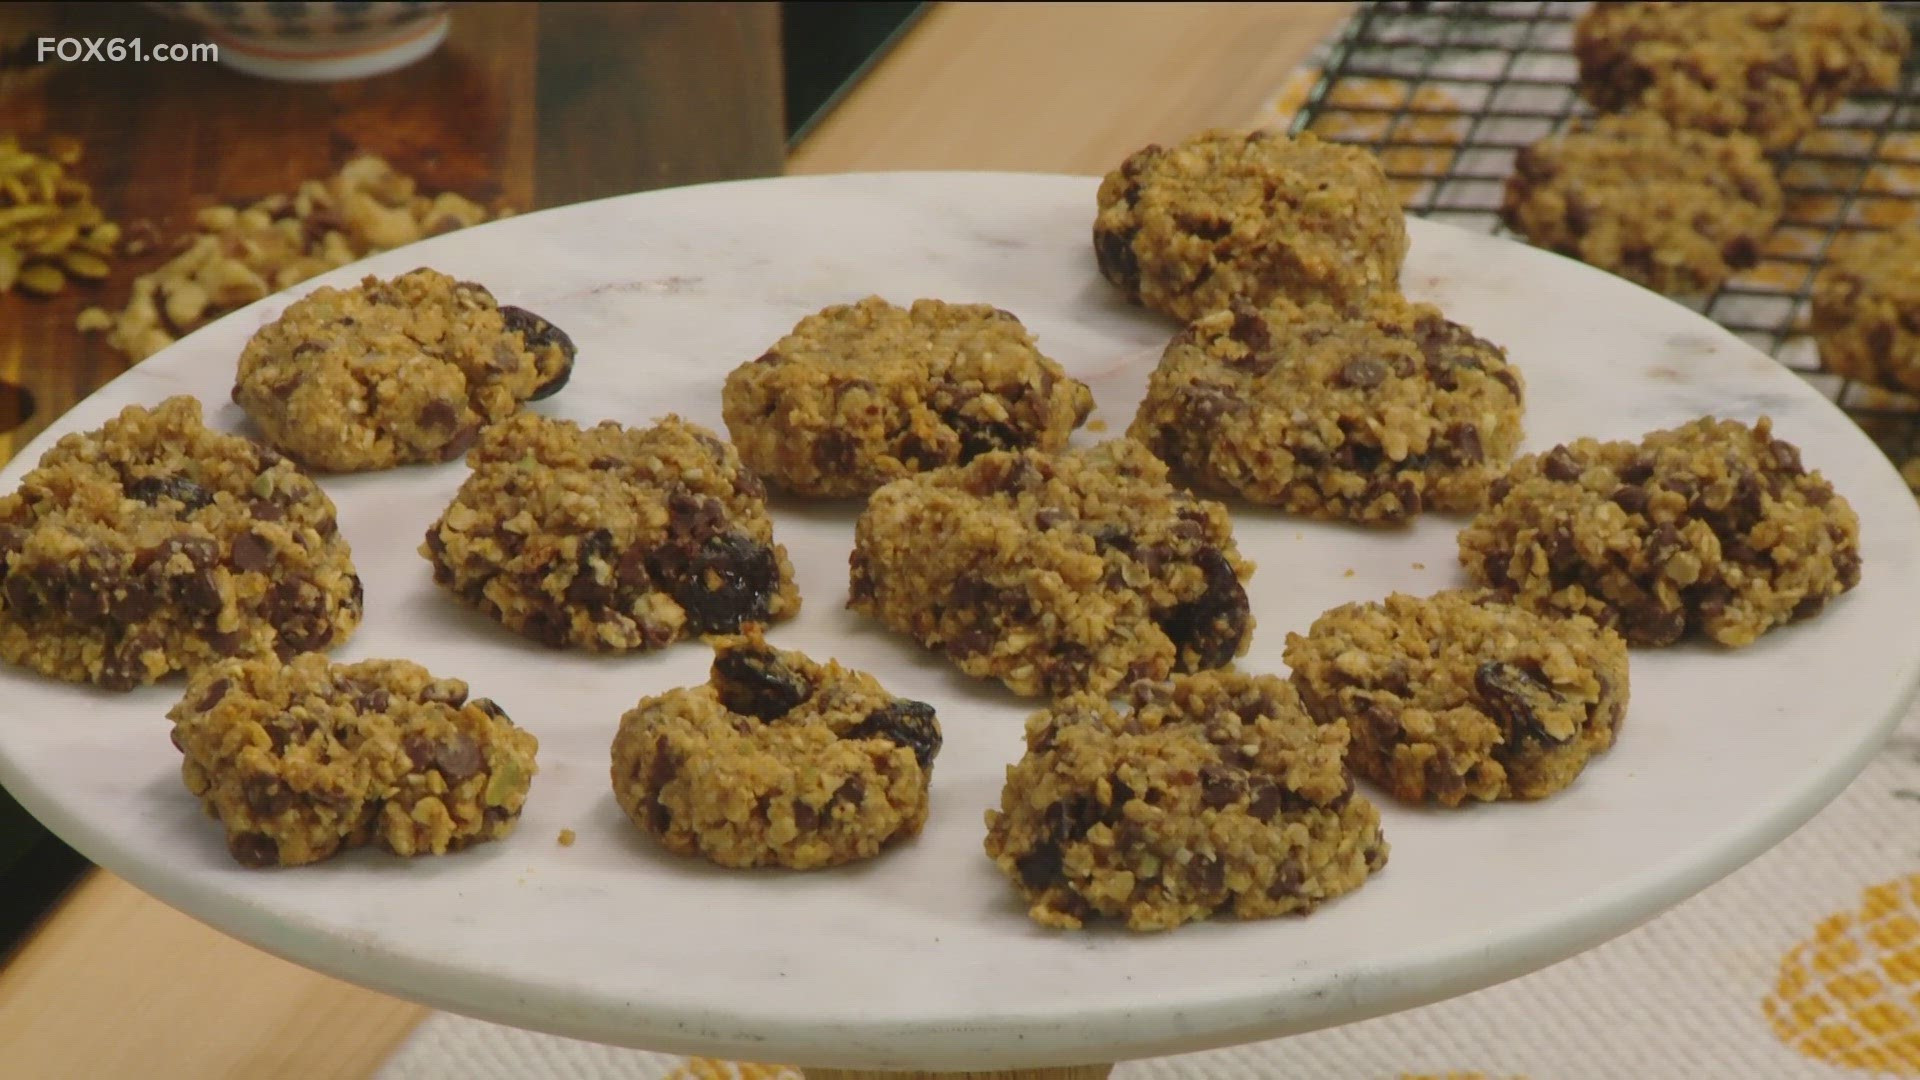 April Godfrey from Sweet, Simple, Delicious shares a cookie recipe packed with ingredients that support healthy brain function.